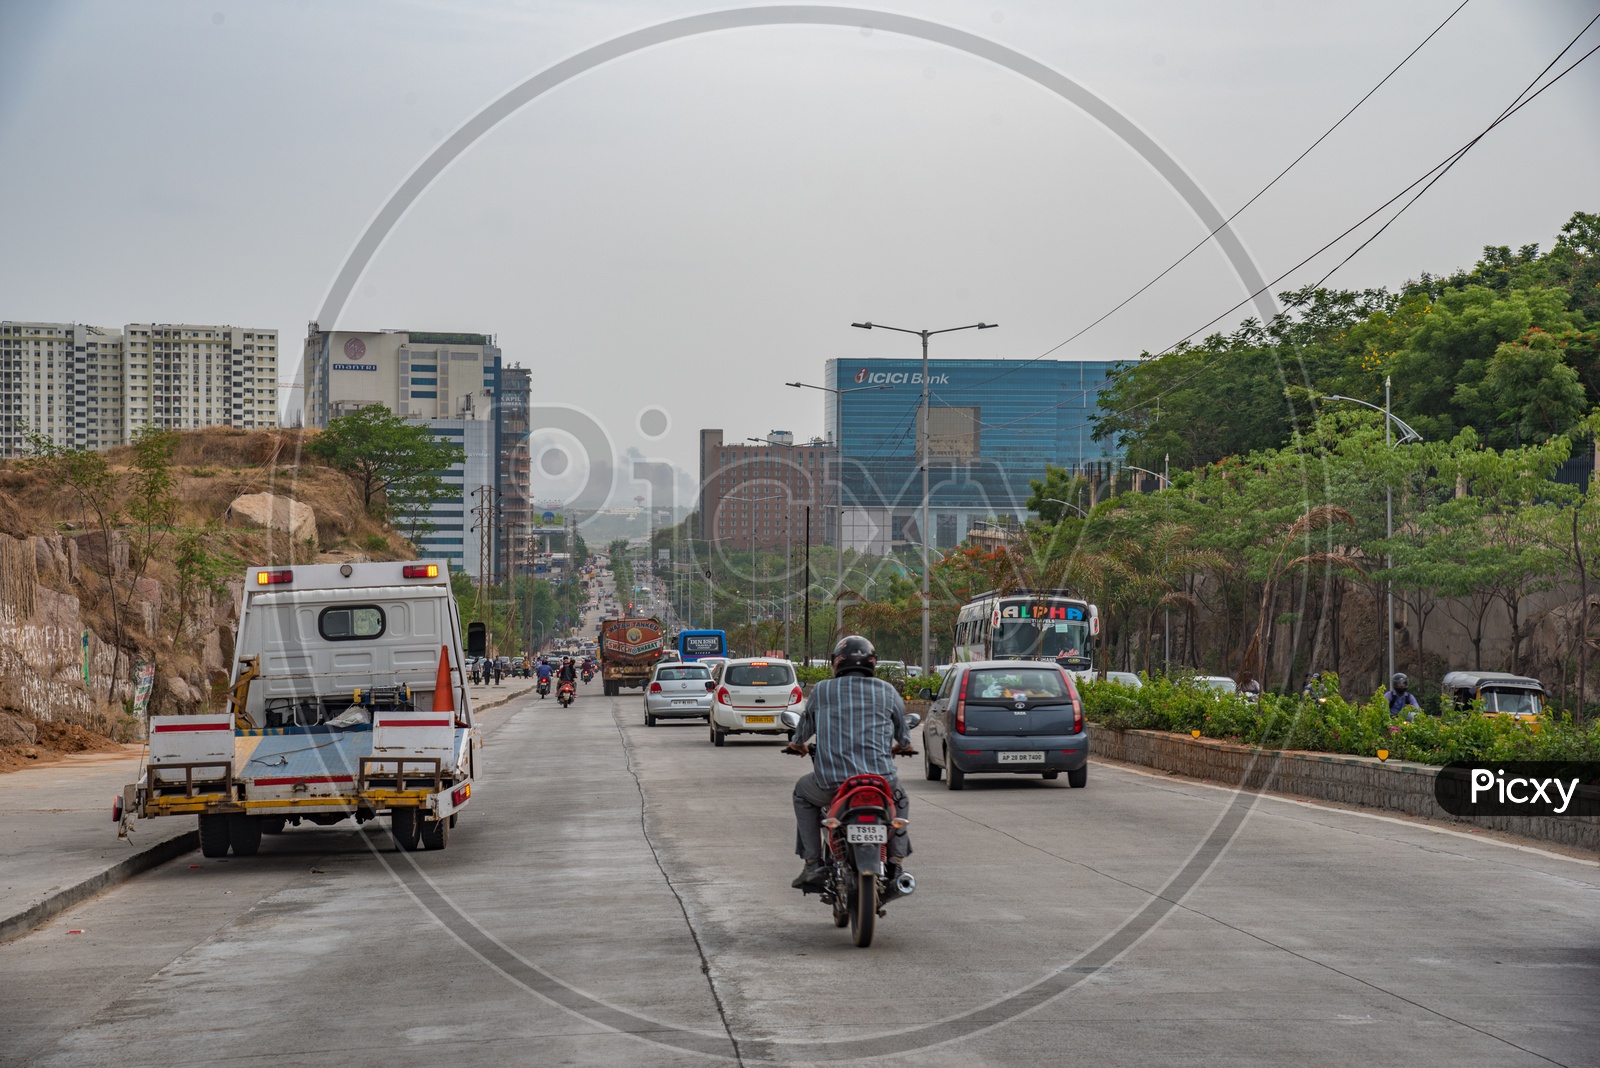 Financial District roads in Hyderabad,